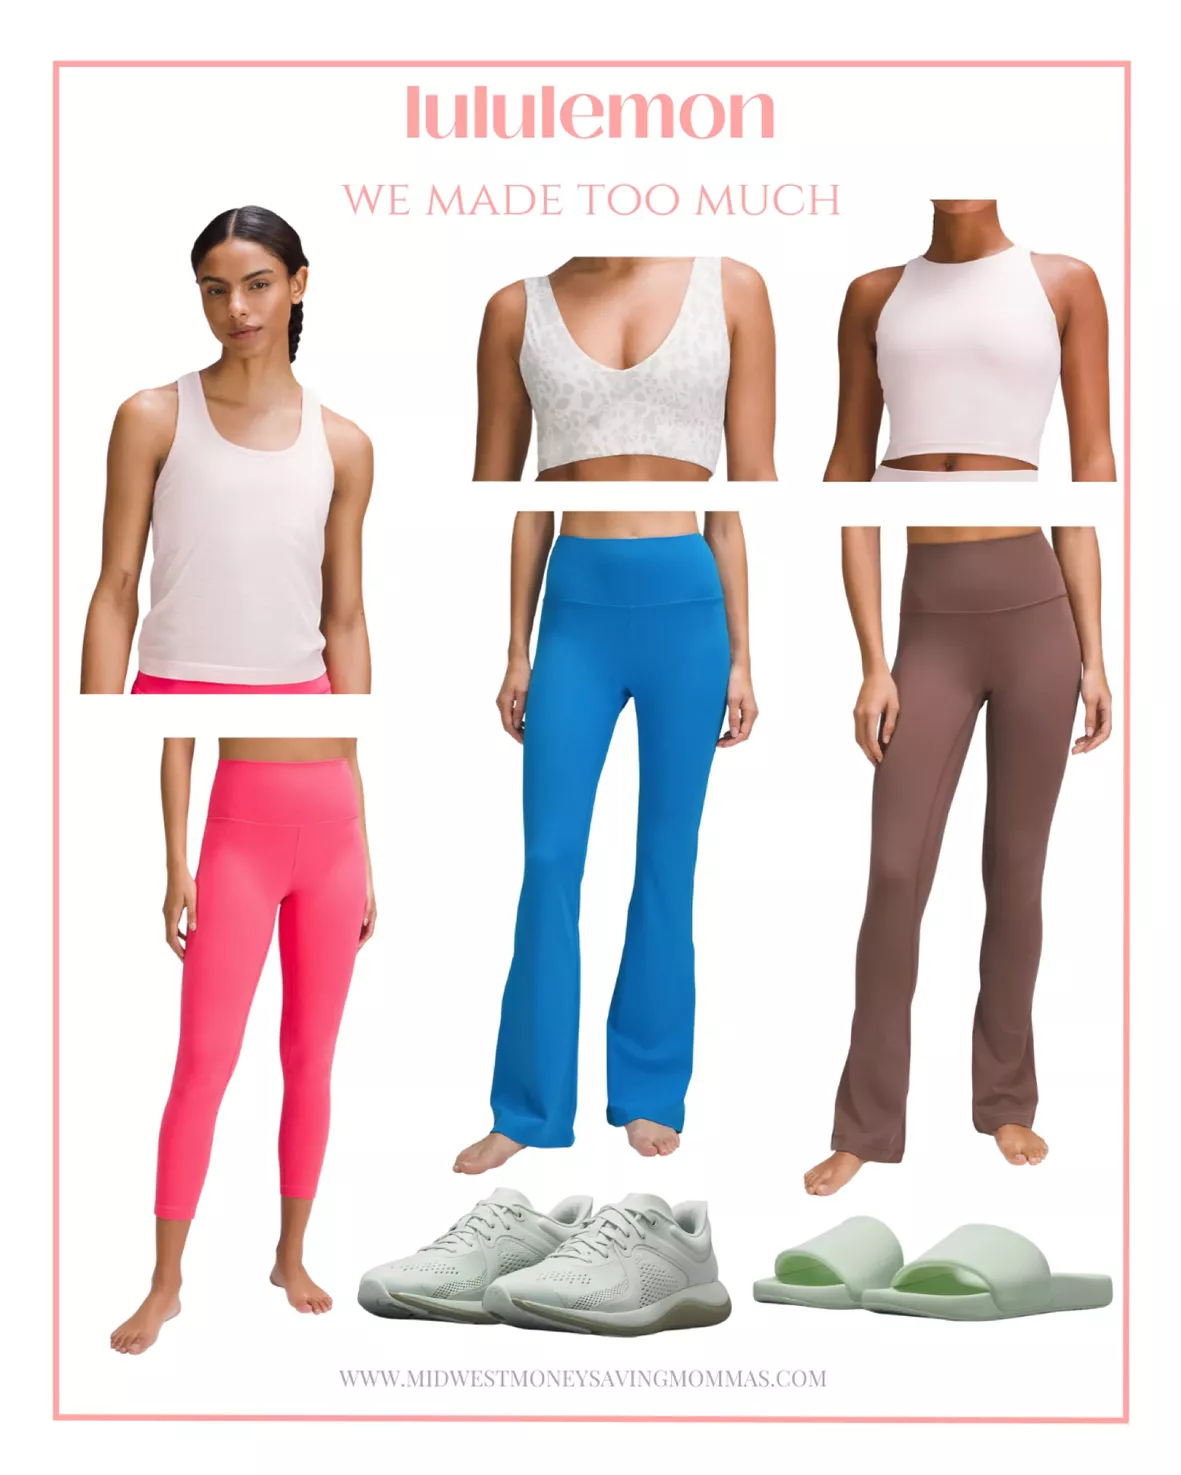 We Made Too Much: Lululemon women's shoes 